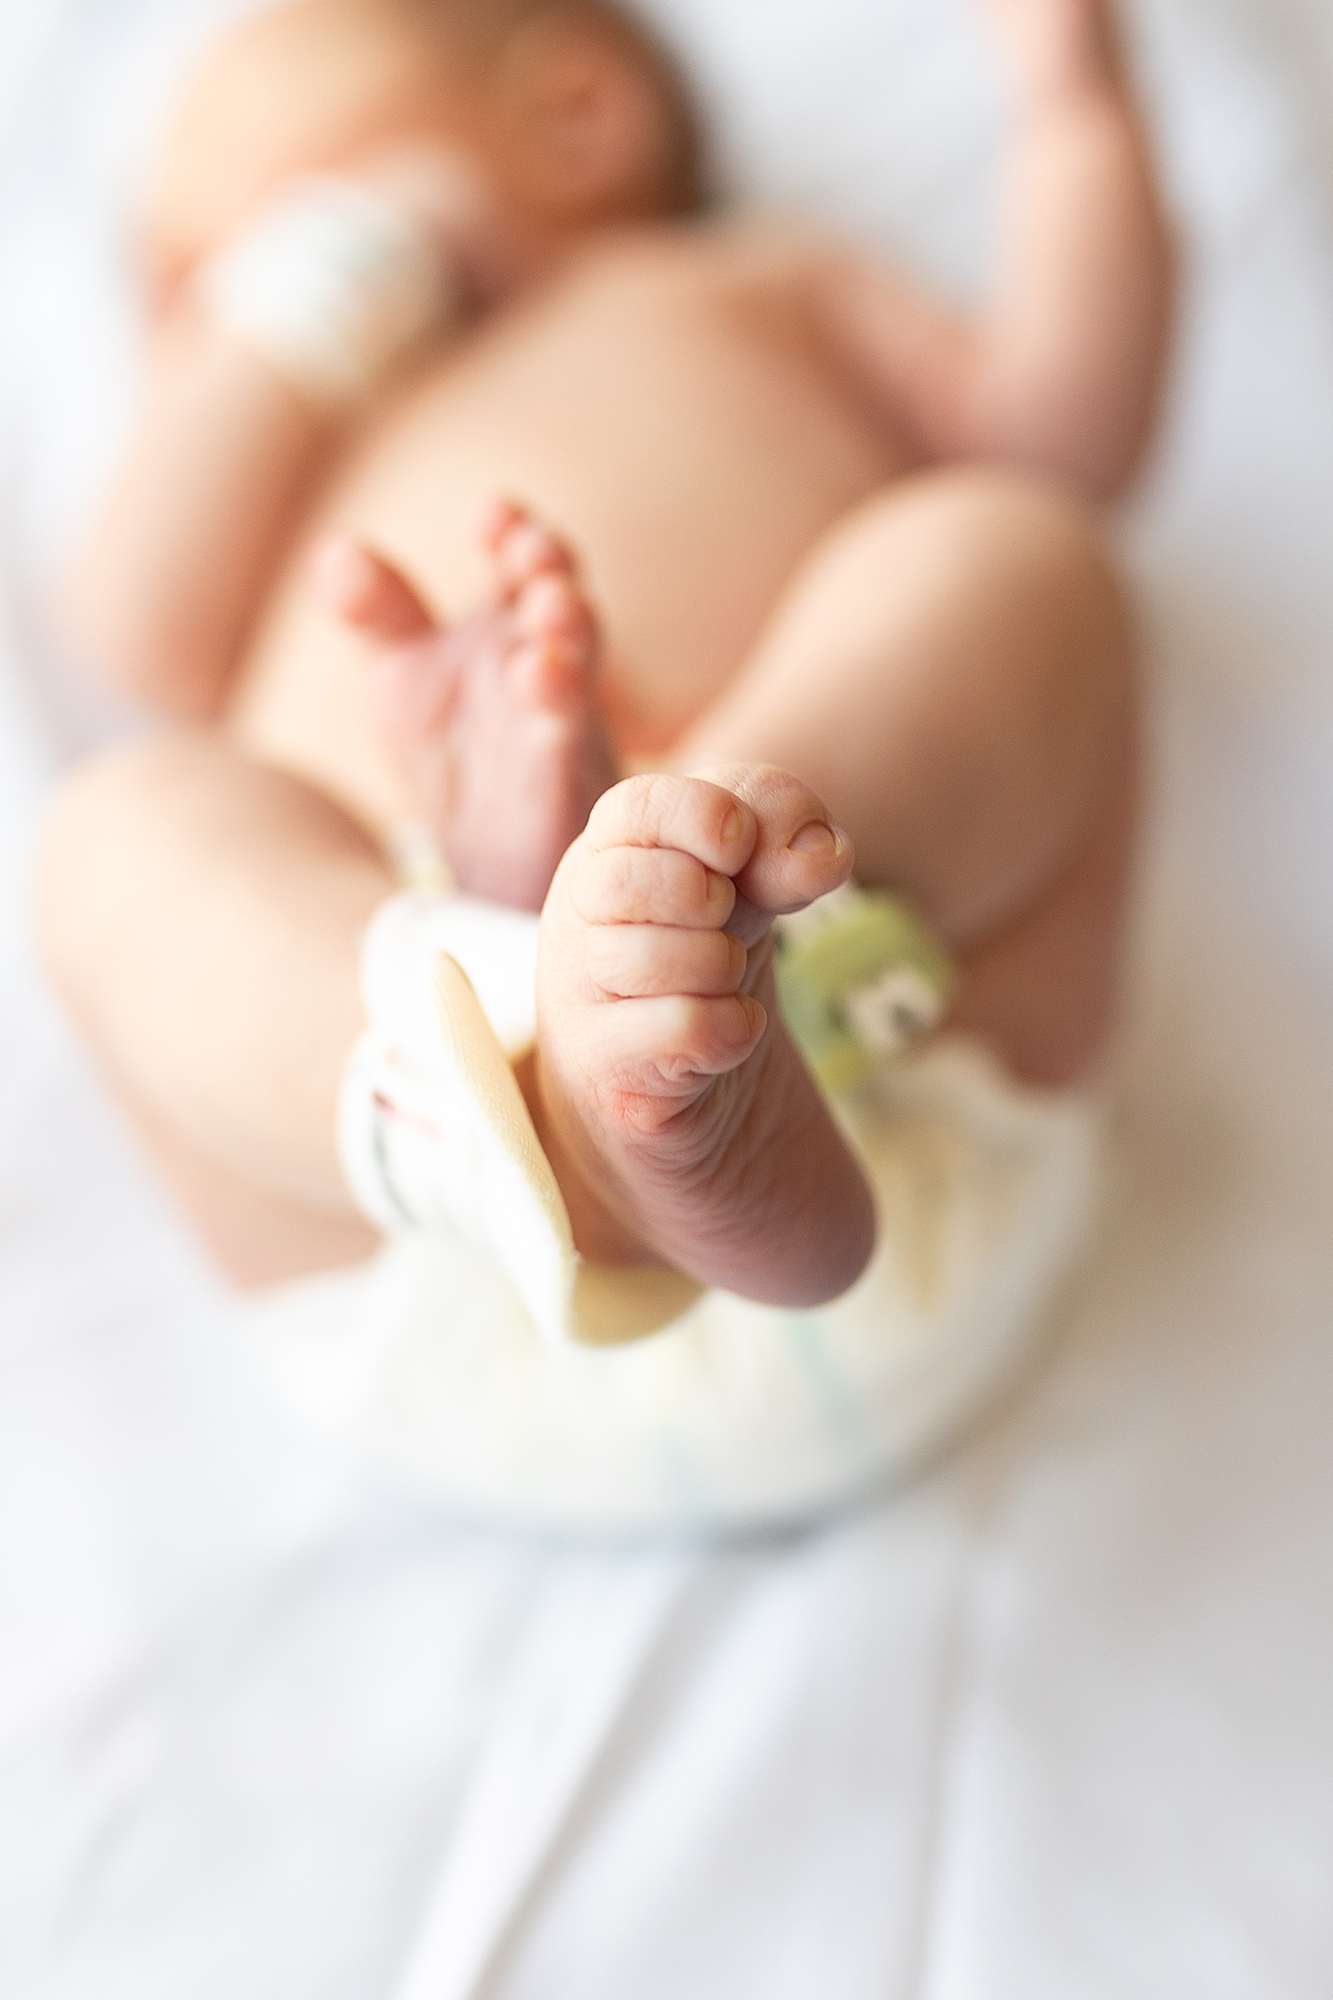 Newborn feet during a Fresh 48 Photography session in Mankato, MN.